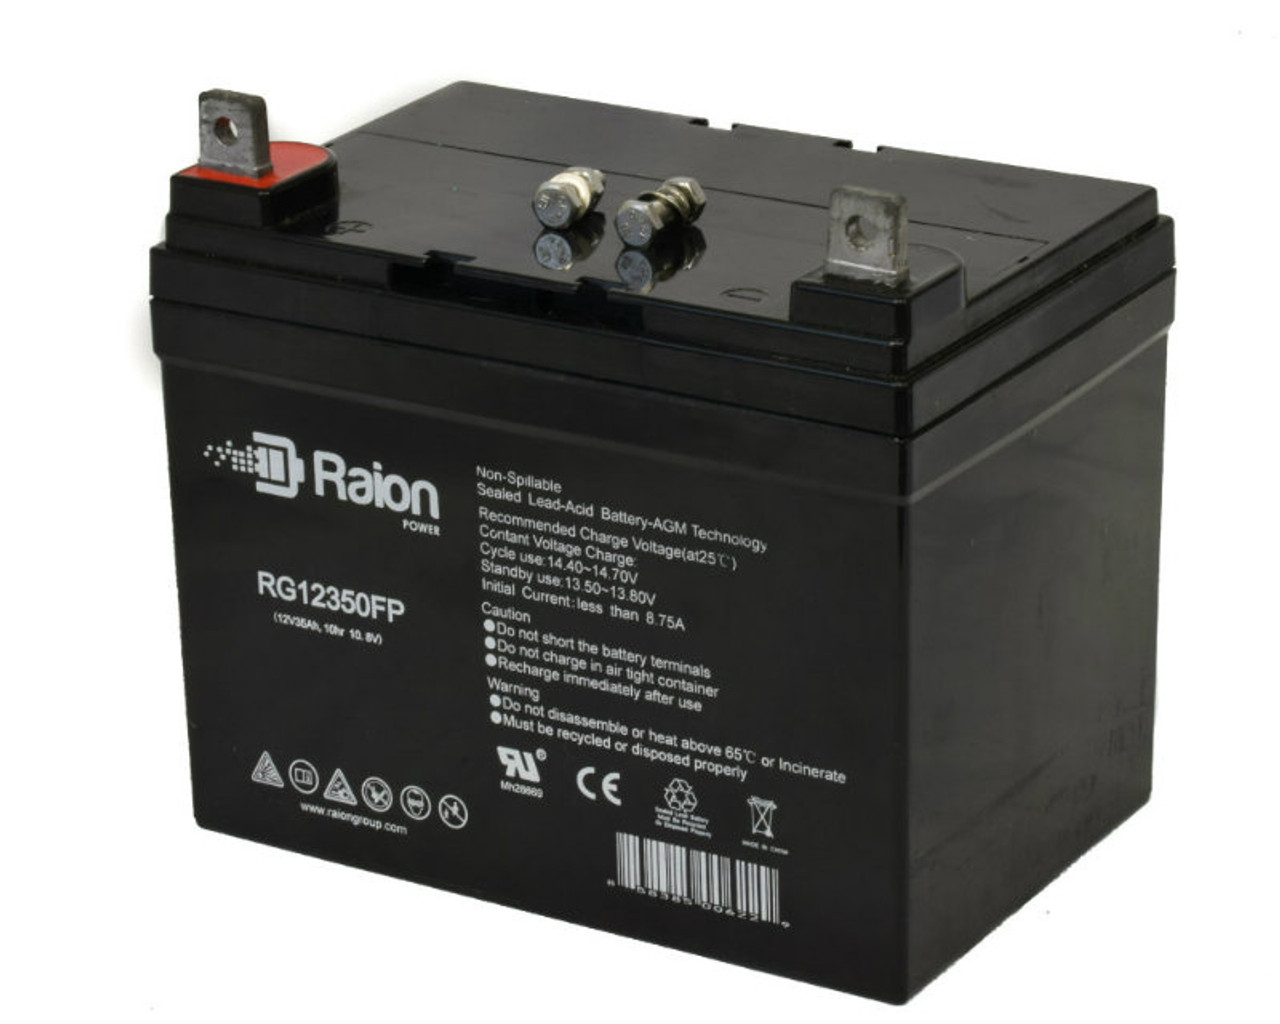 Raion Power Replacement 12V 35Ah RG12350FP Battery for NPP Power NP12-35Ah